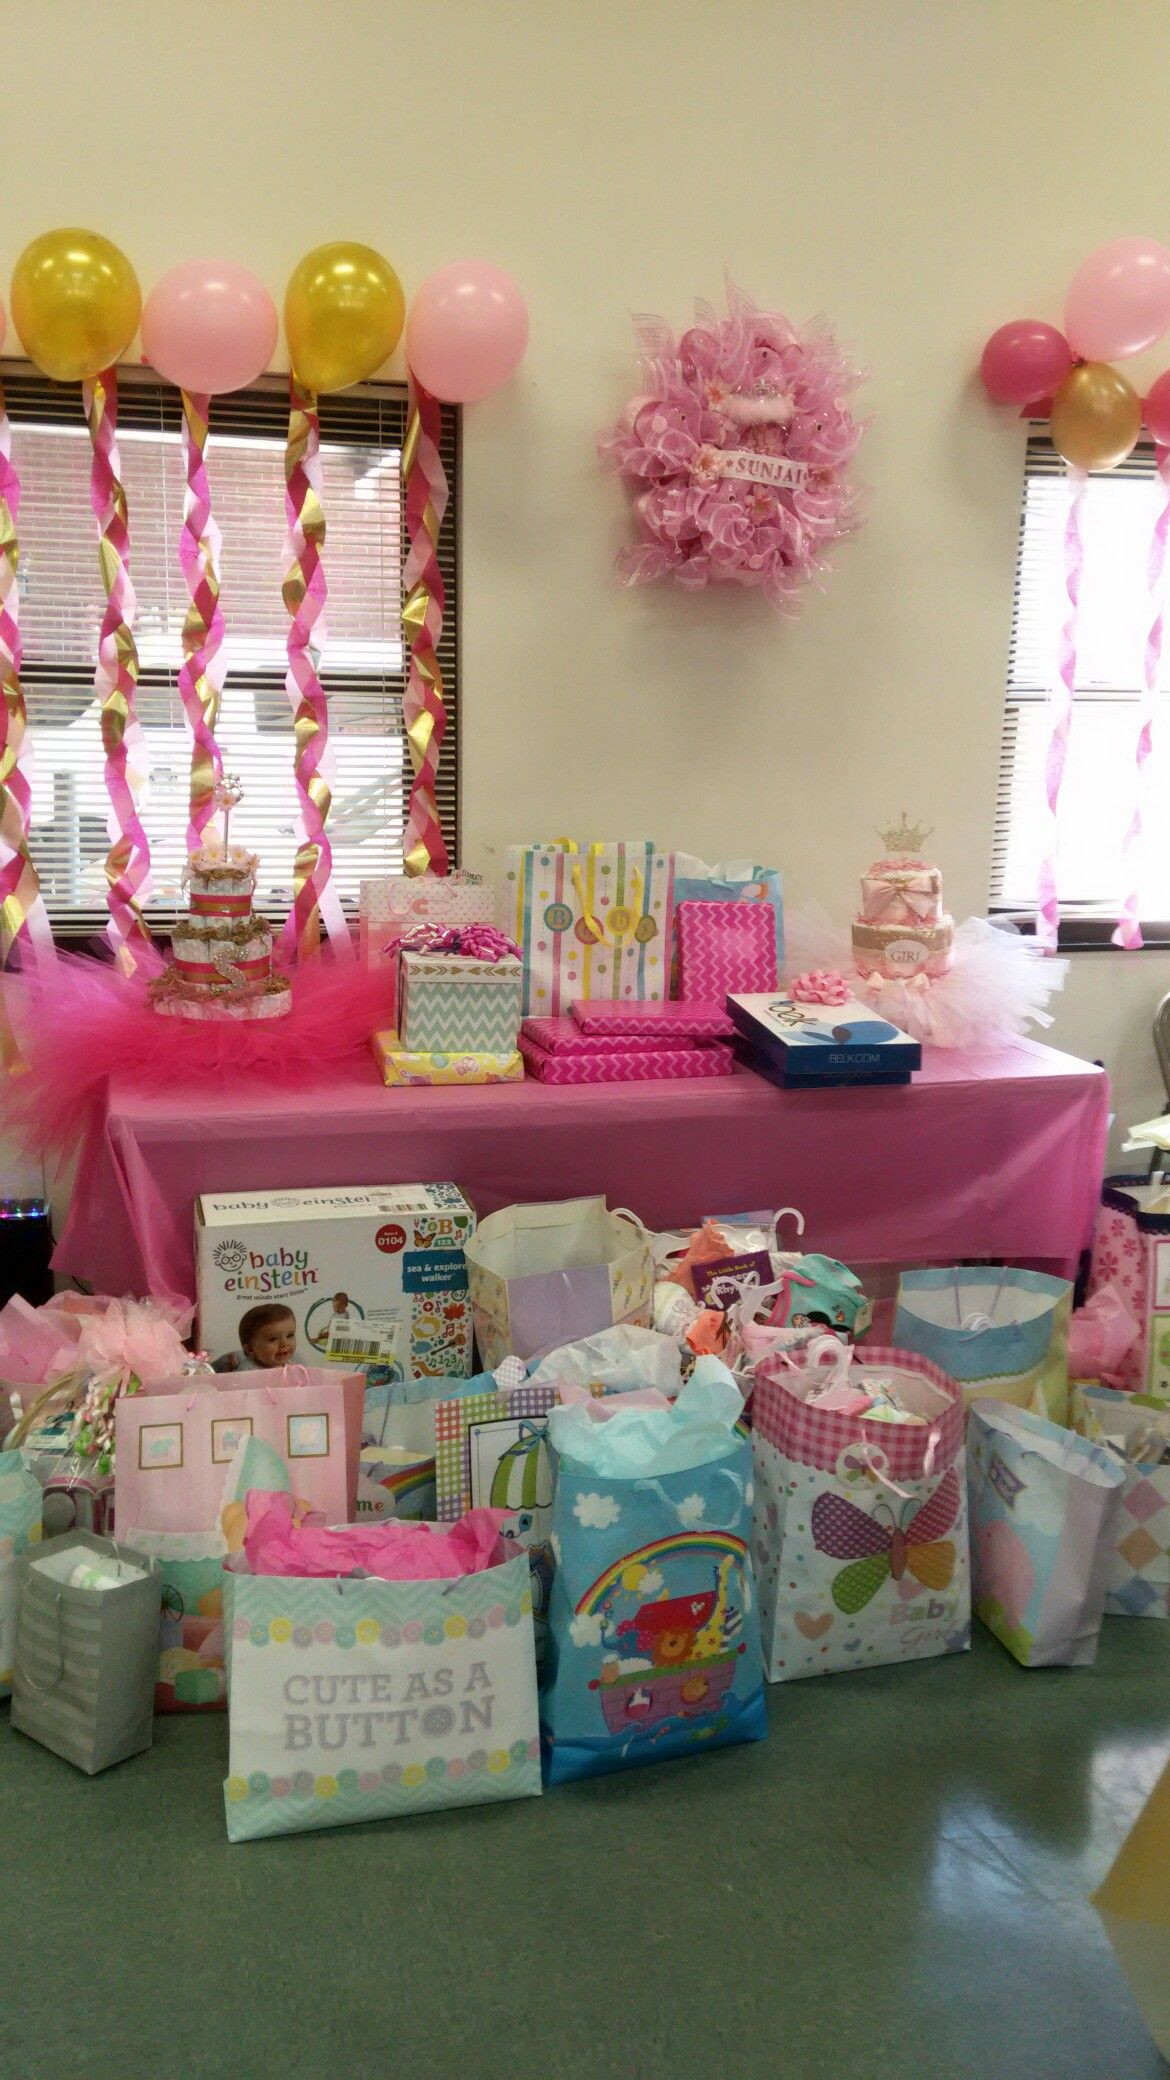 Gift Table Baby Shower Ideas
 My niece s baby shower t table